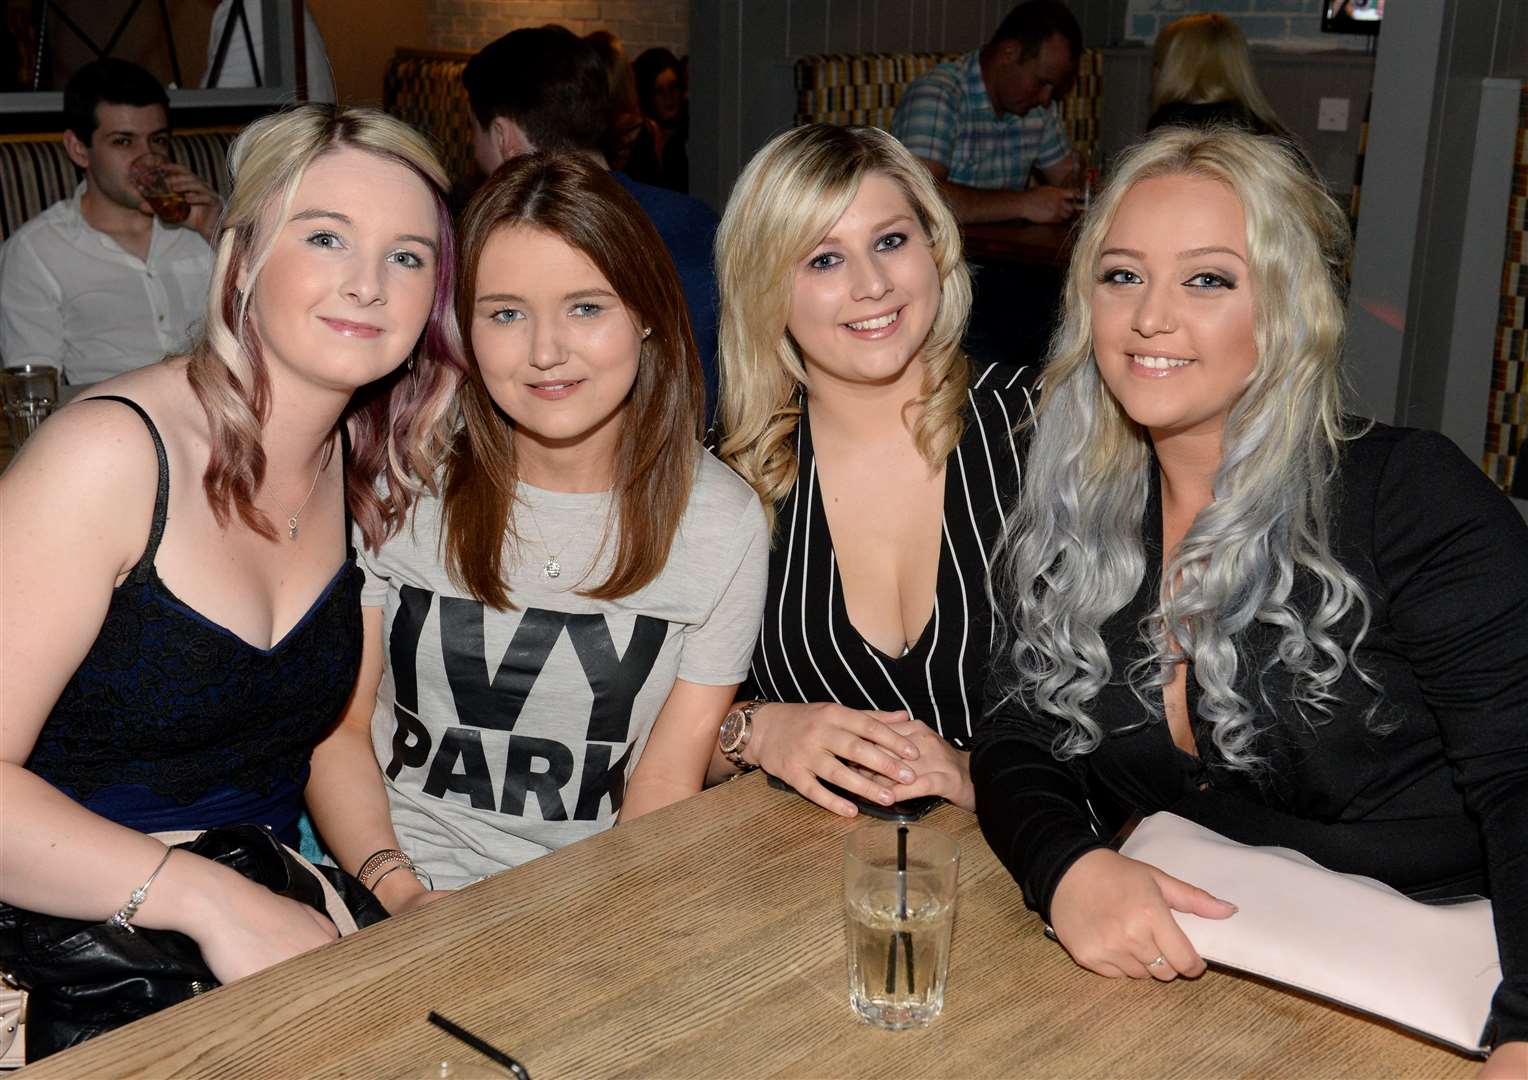 Shannen Blackley, Sarah MacInnes, Kayleigh Findley and Carly Young party at Auctioneers. Picture: Gary Anthony. Image No.033756.